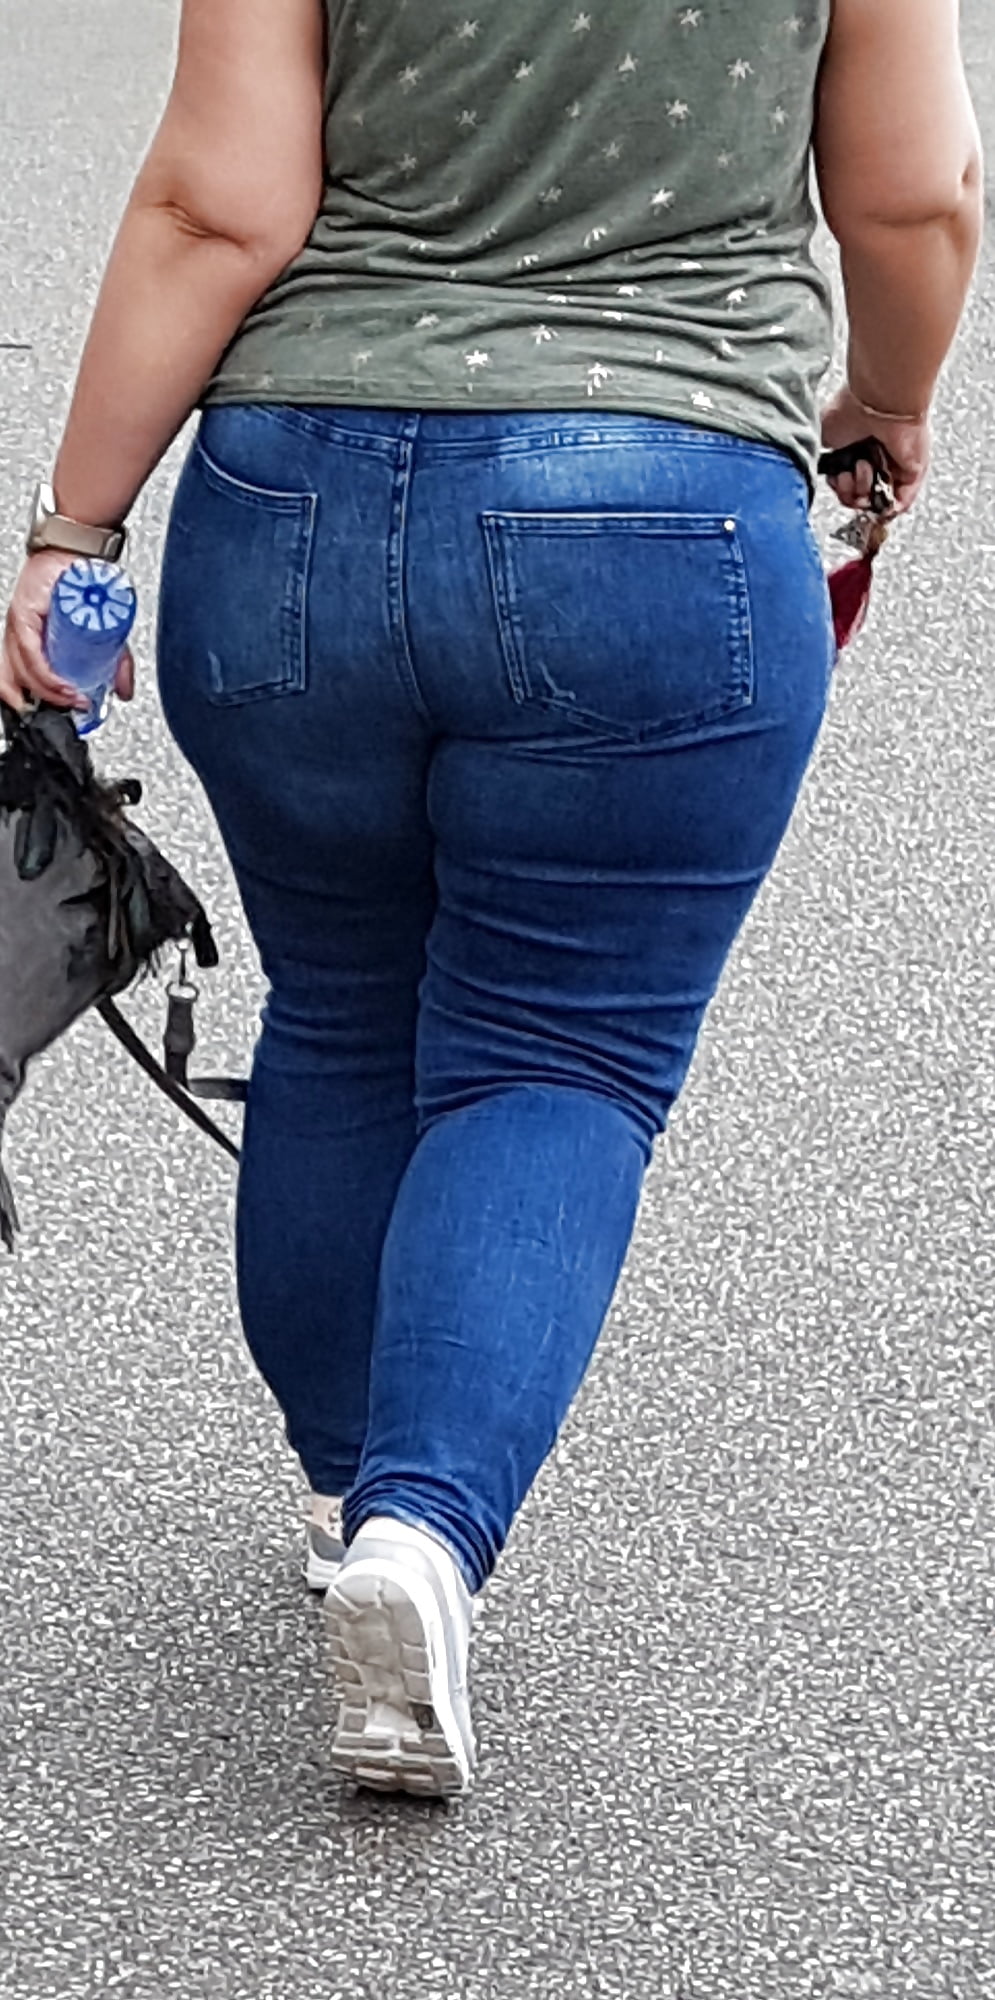 Bbw_milf_with_thick_legs_and_butt_in_tight_jeans (24/34)